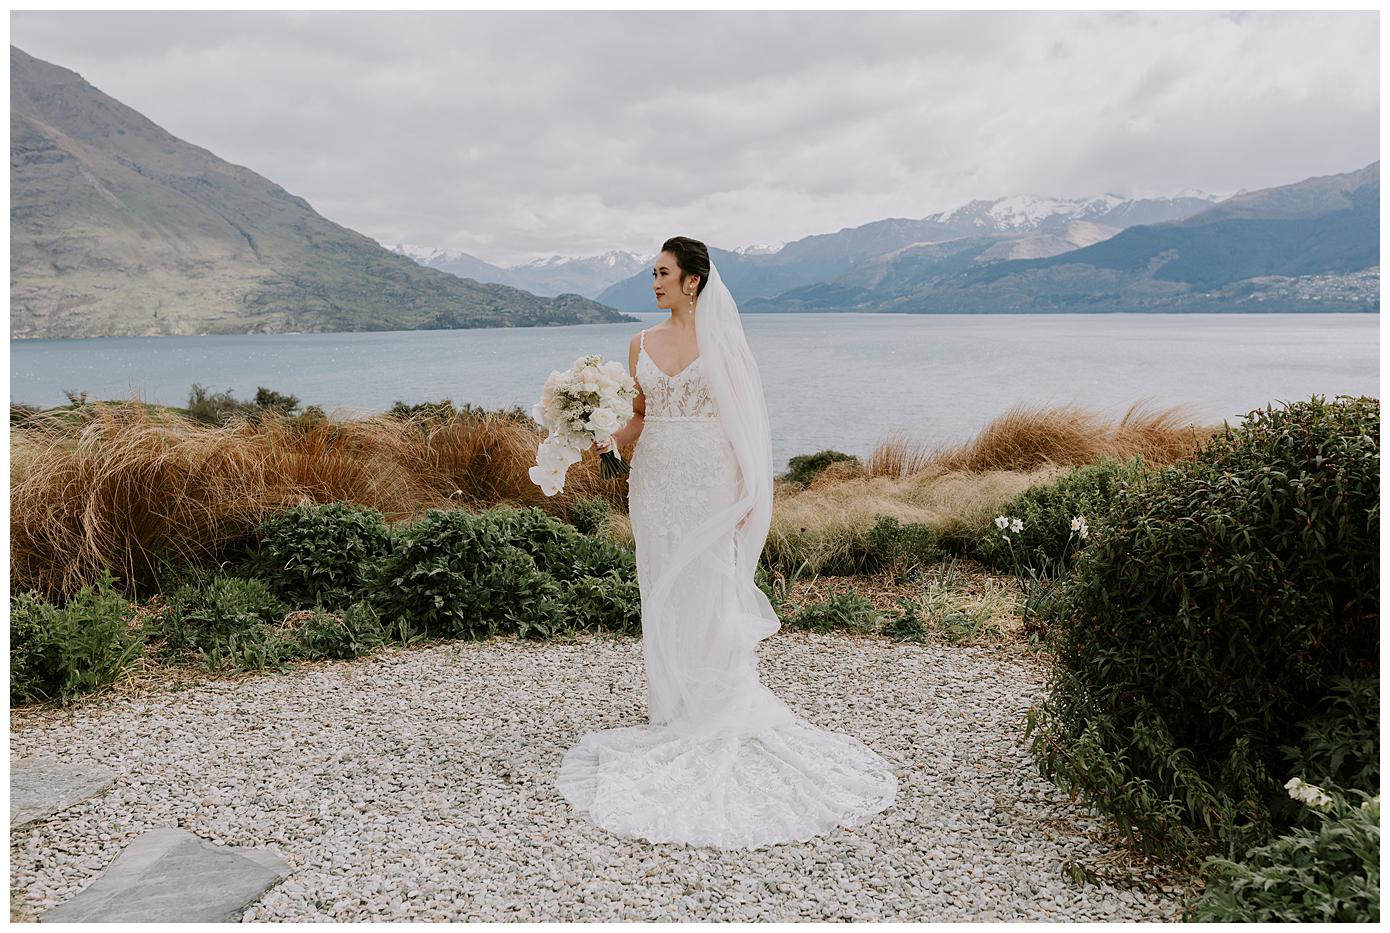 Charlotte Kiri Photography - Elopement Photography with bride wearing gorgeous floral lace gown with long train and sheer veil, holding pink and white bouquet in front of a stunning backdrop of lakes and mountains at Jack's Retreat in Queenstown, New Zealand